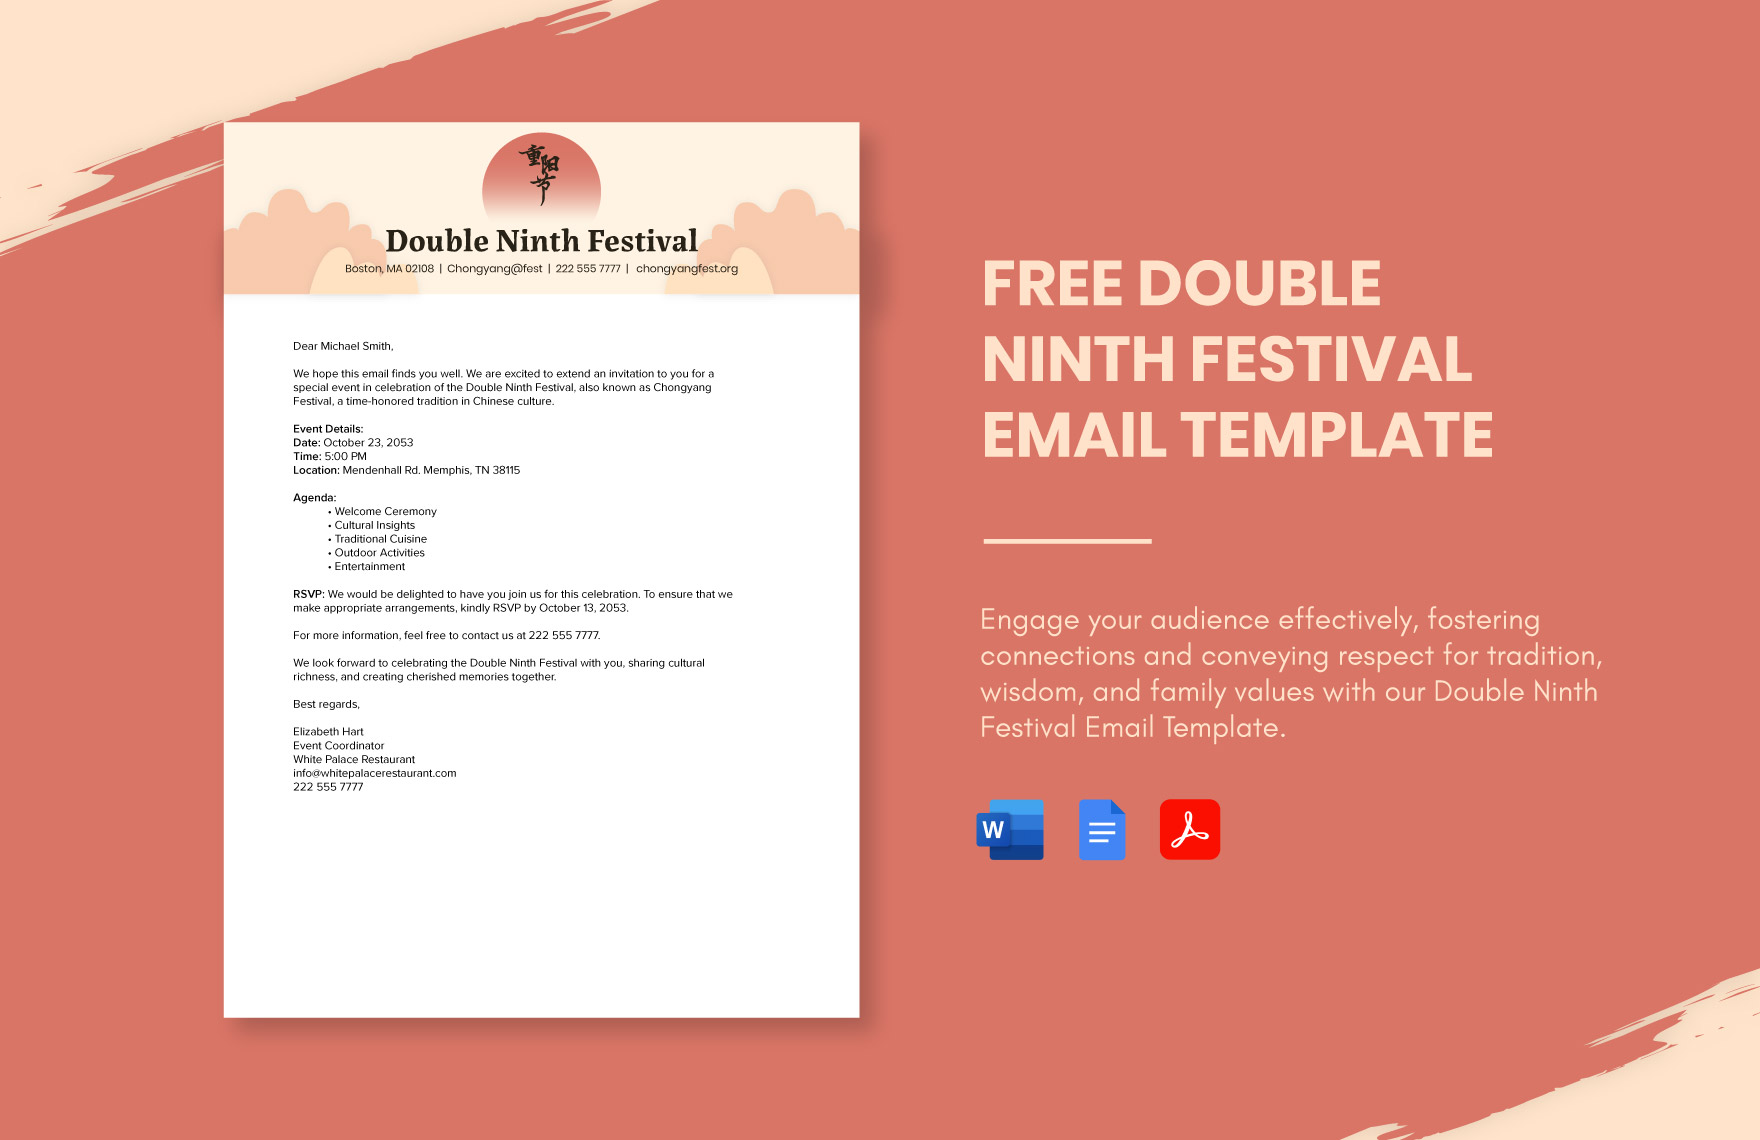 Free Double Ninth Festival Email Template in Word, Google Docs, PDF